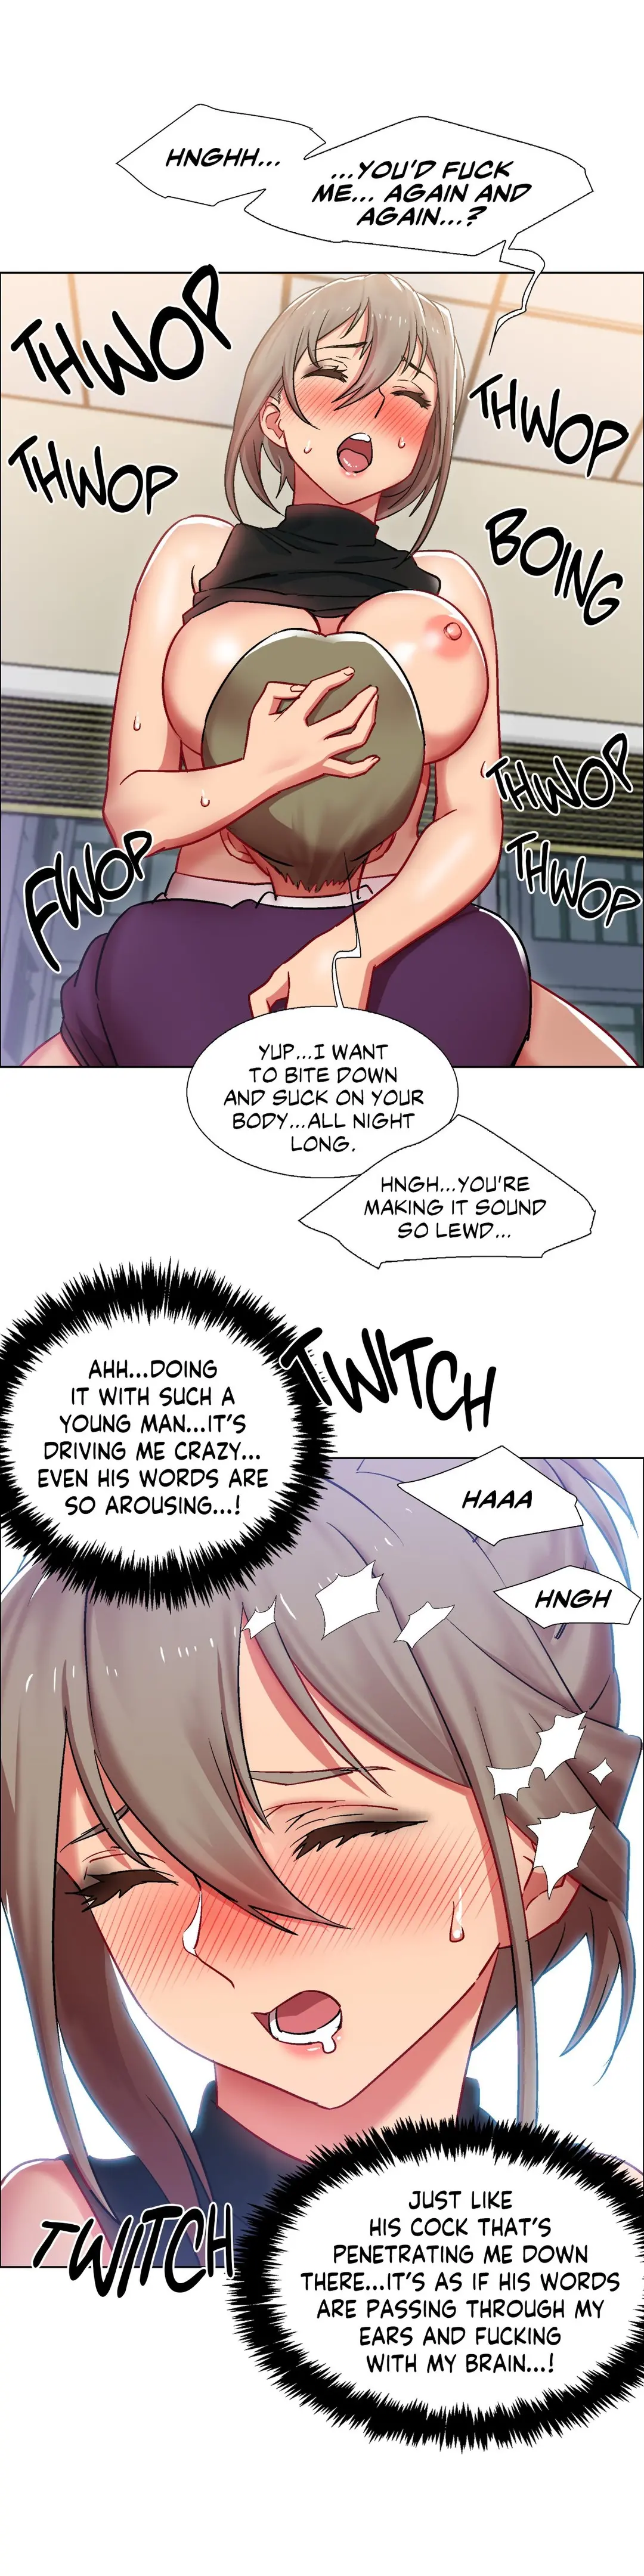 Rental Girls Chapter 13 - Page 3